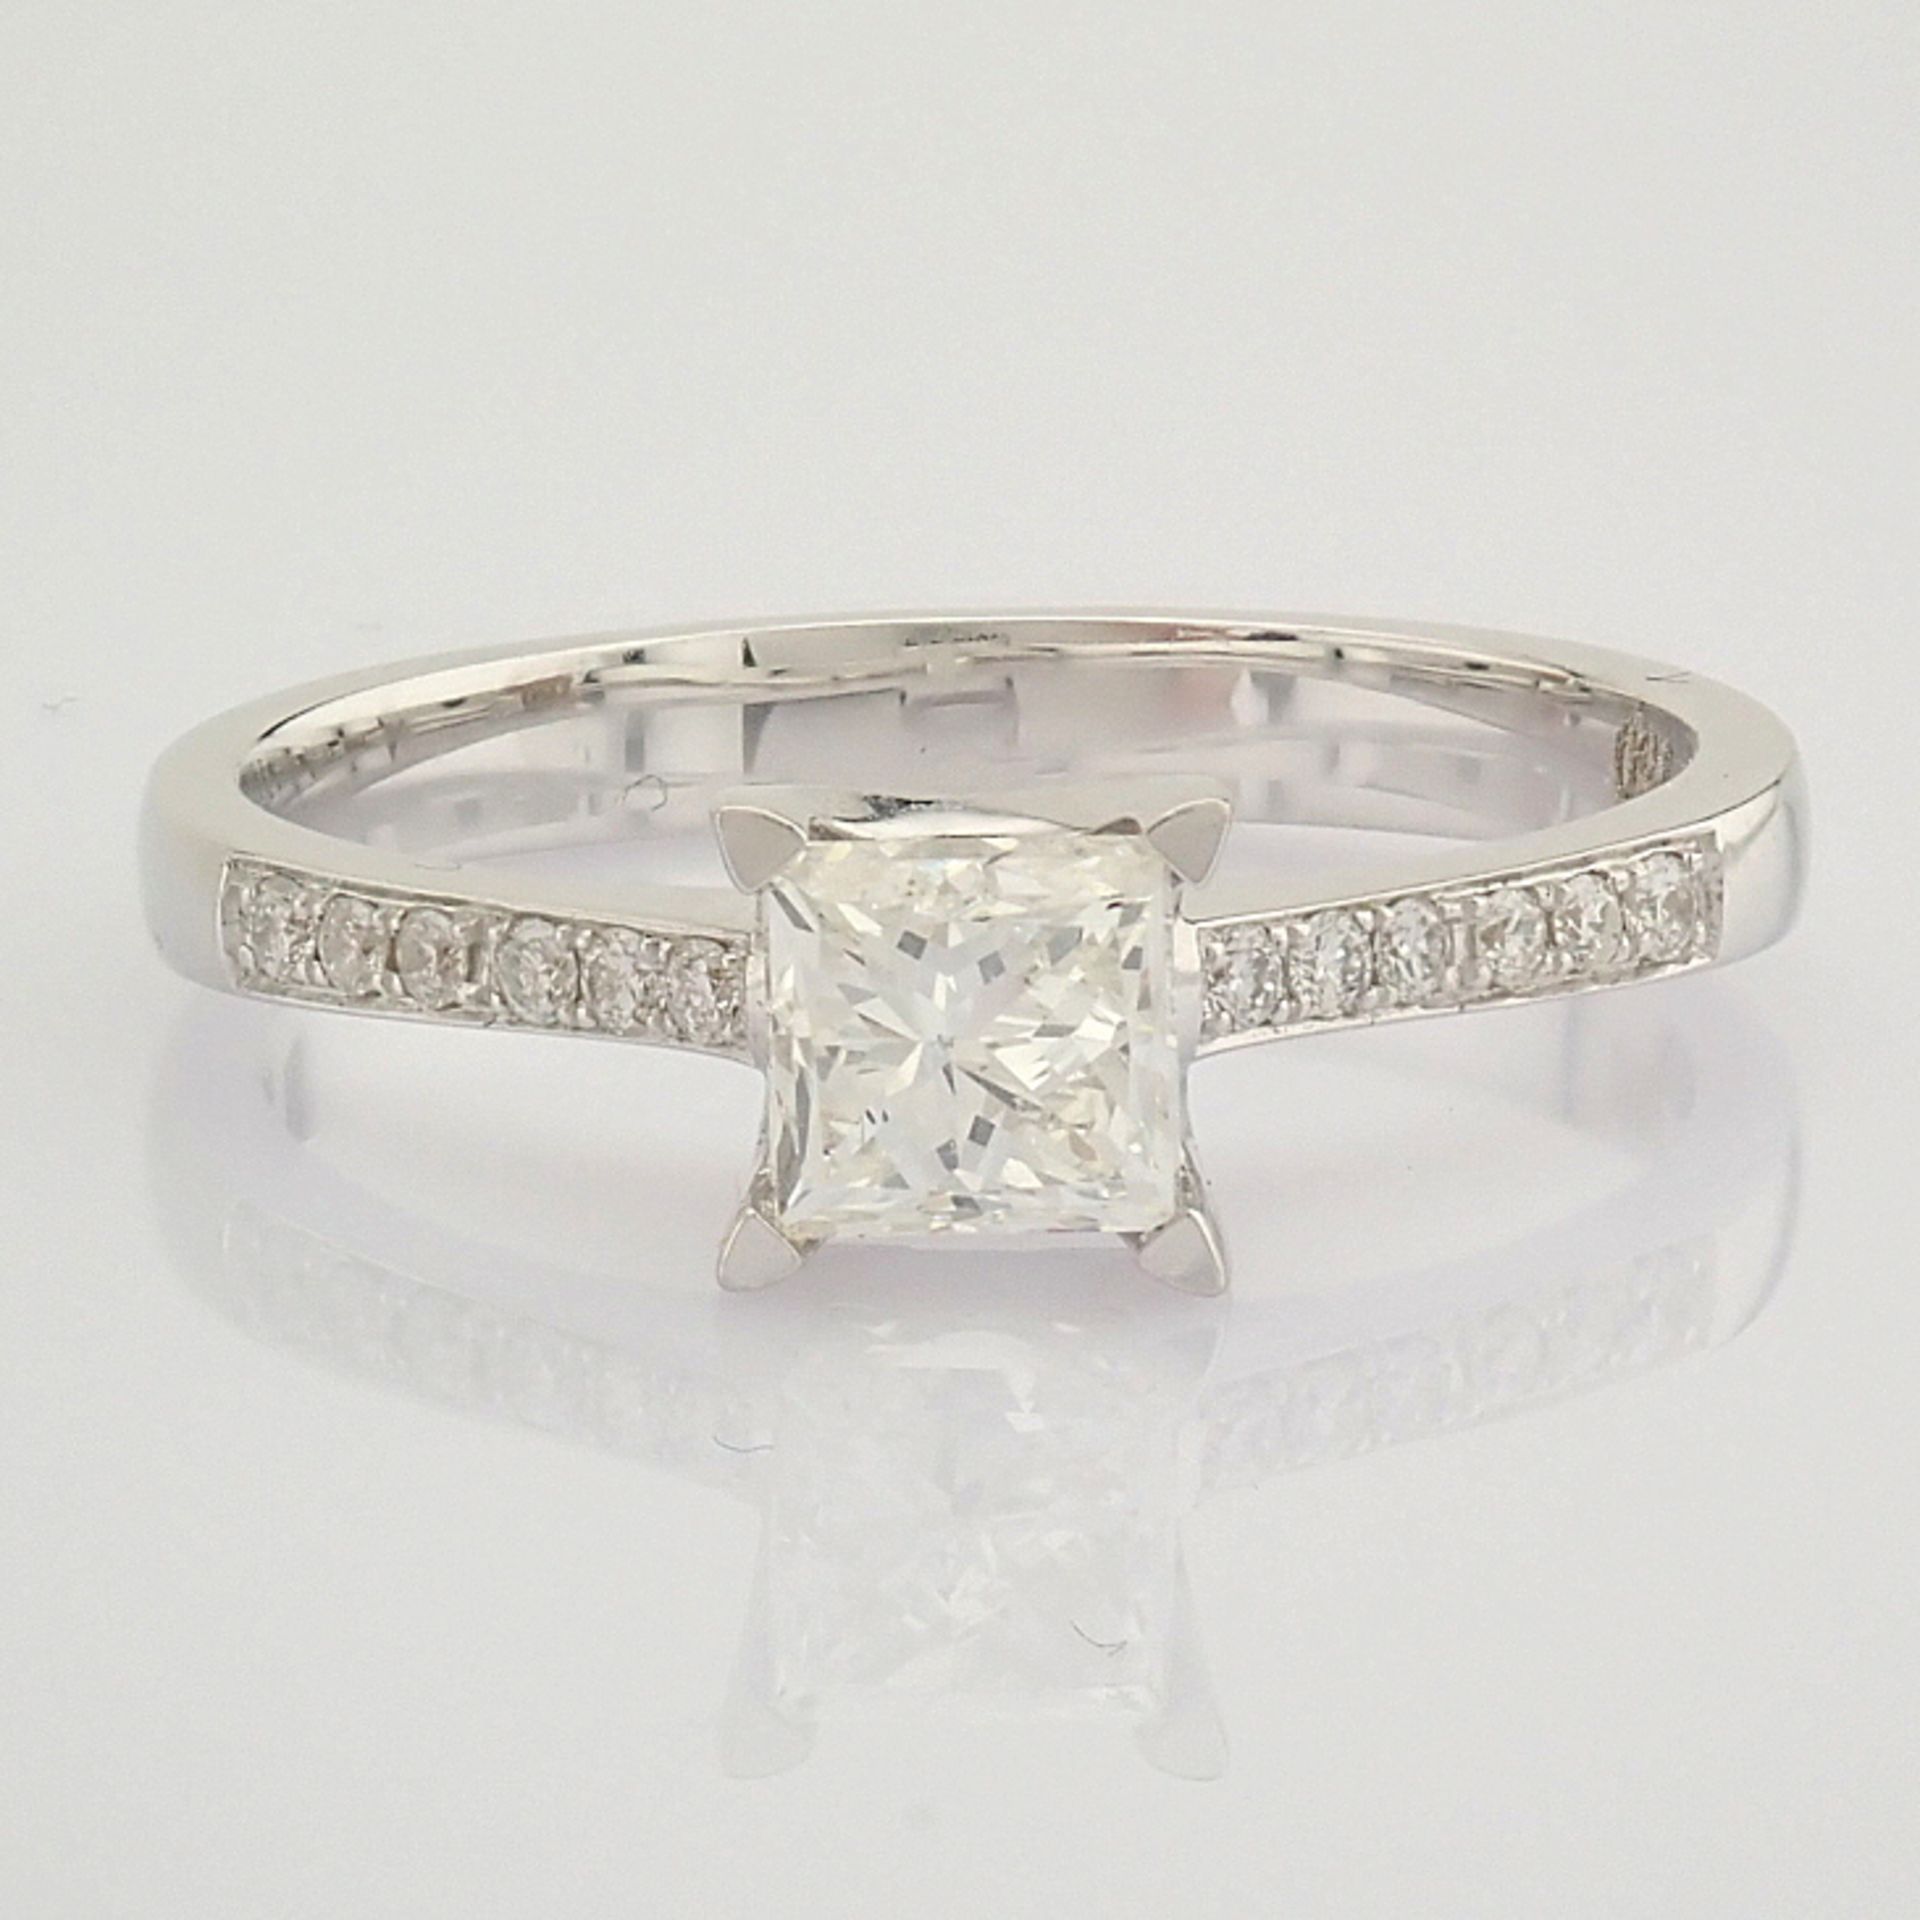 Certificated 18K White Gold Diamond Ring (Total 0.77 ct Stone) - Image 6 of 9